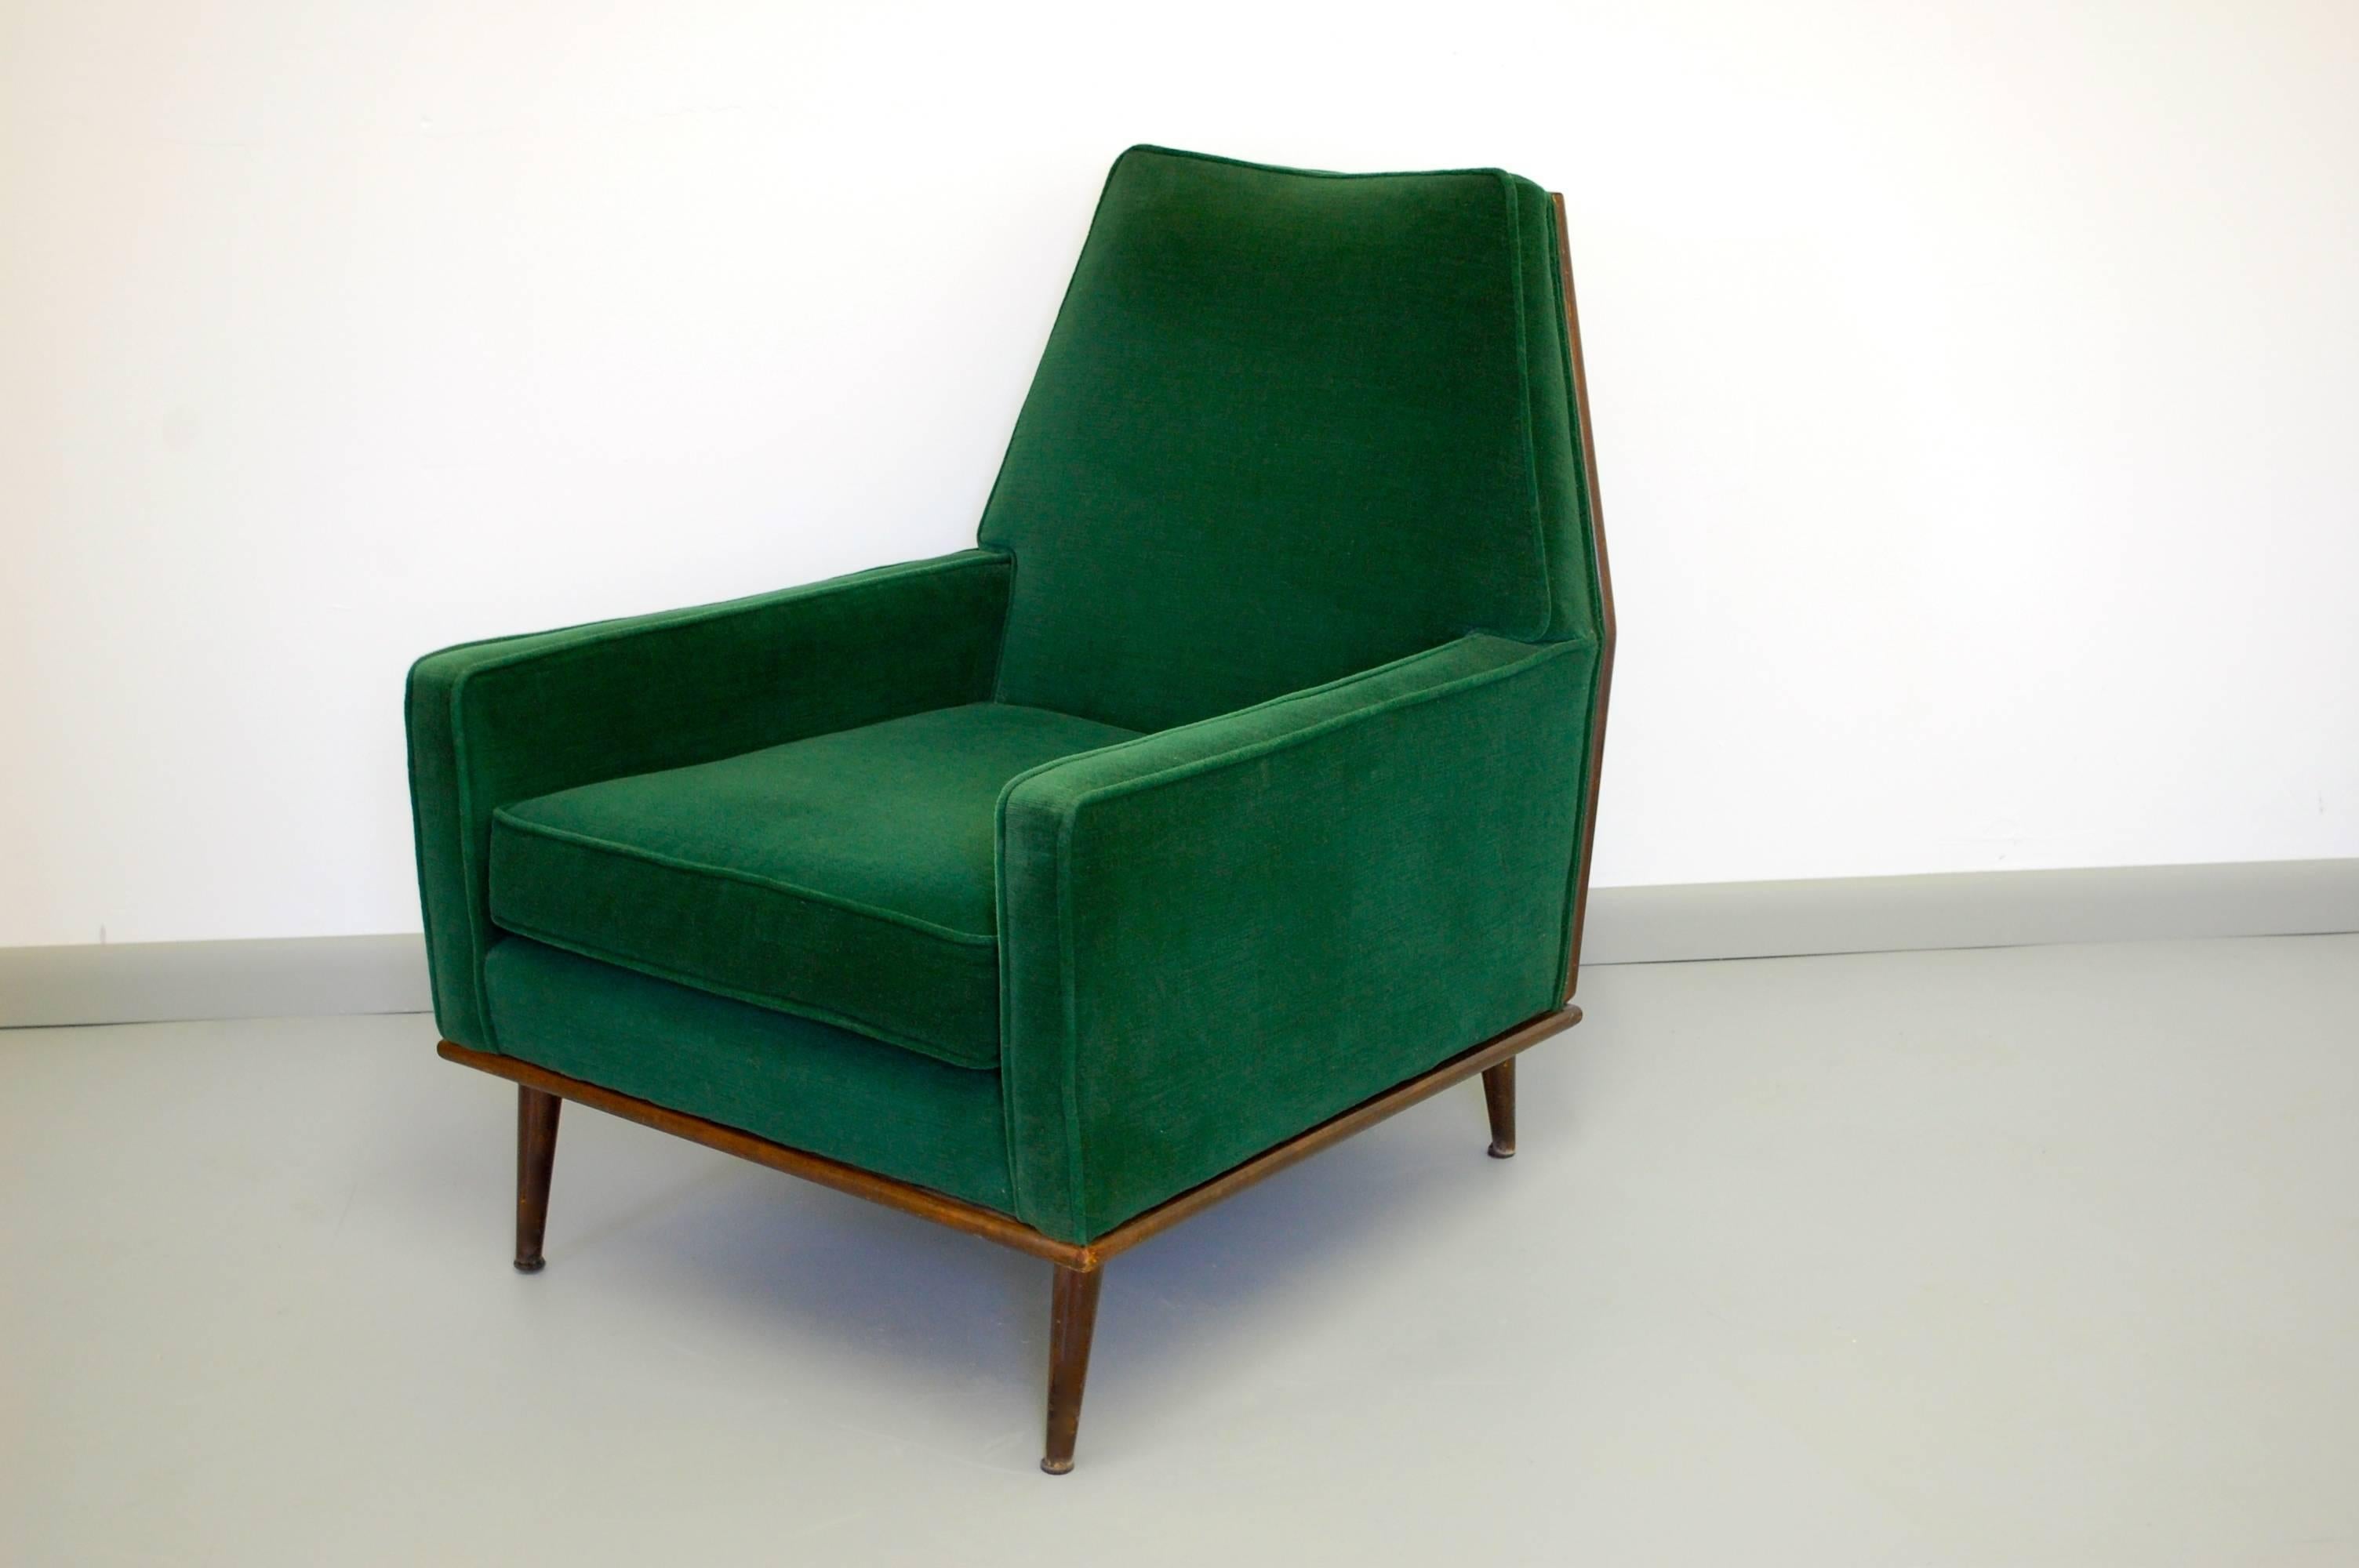 Incredible Mid-Century Modern lounge chair with stunning original emerald green mohair surrounded by walnut frame. Incredibly comfortable, dynamic chair.